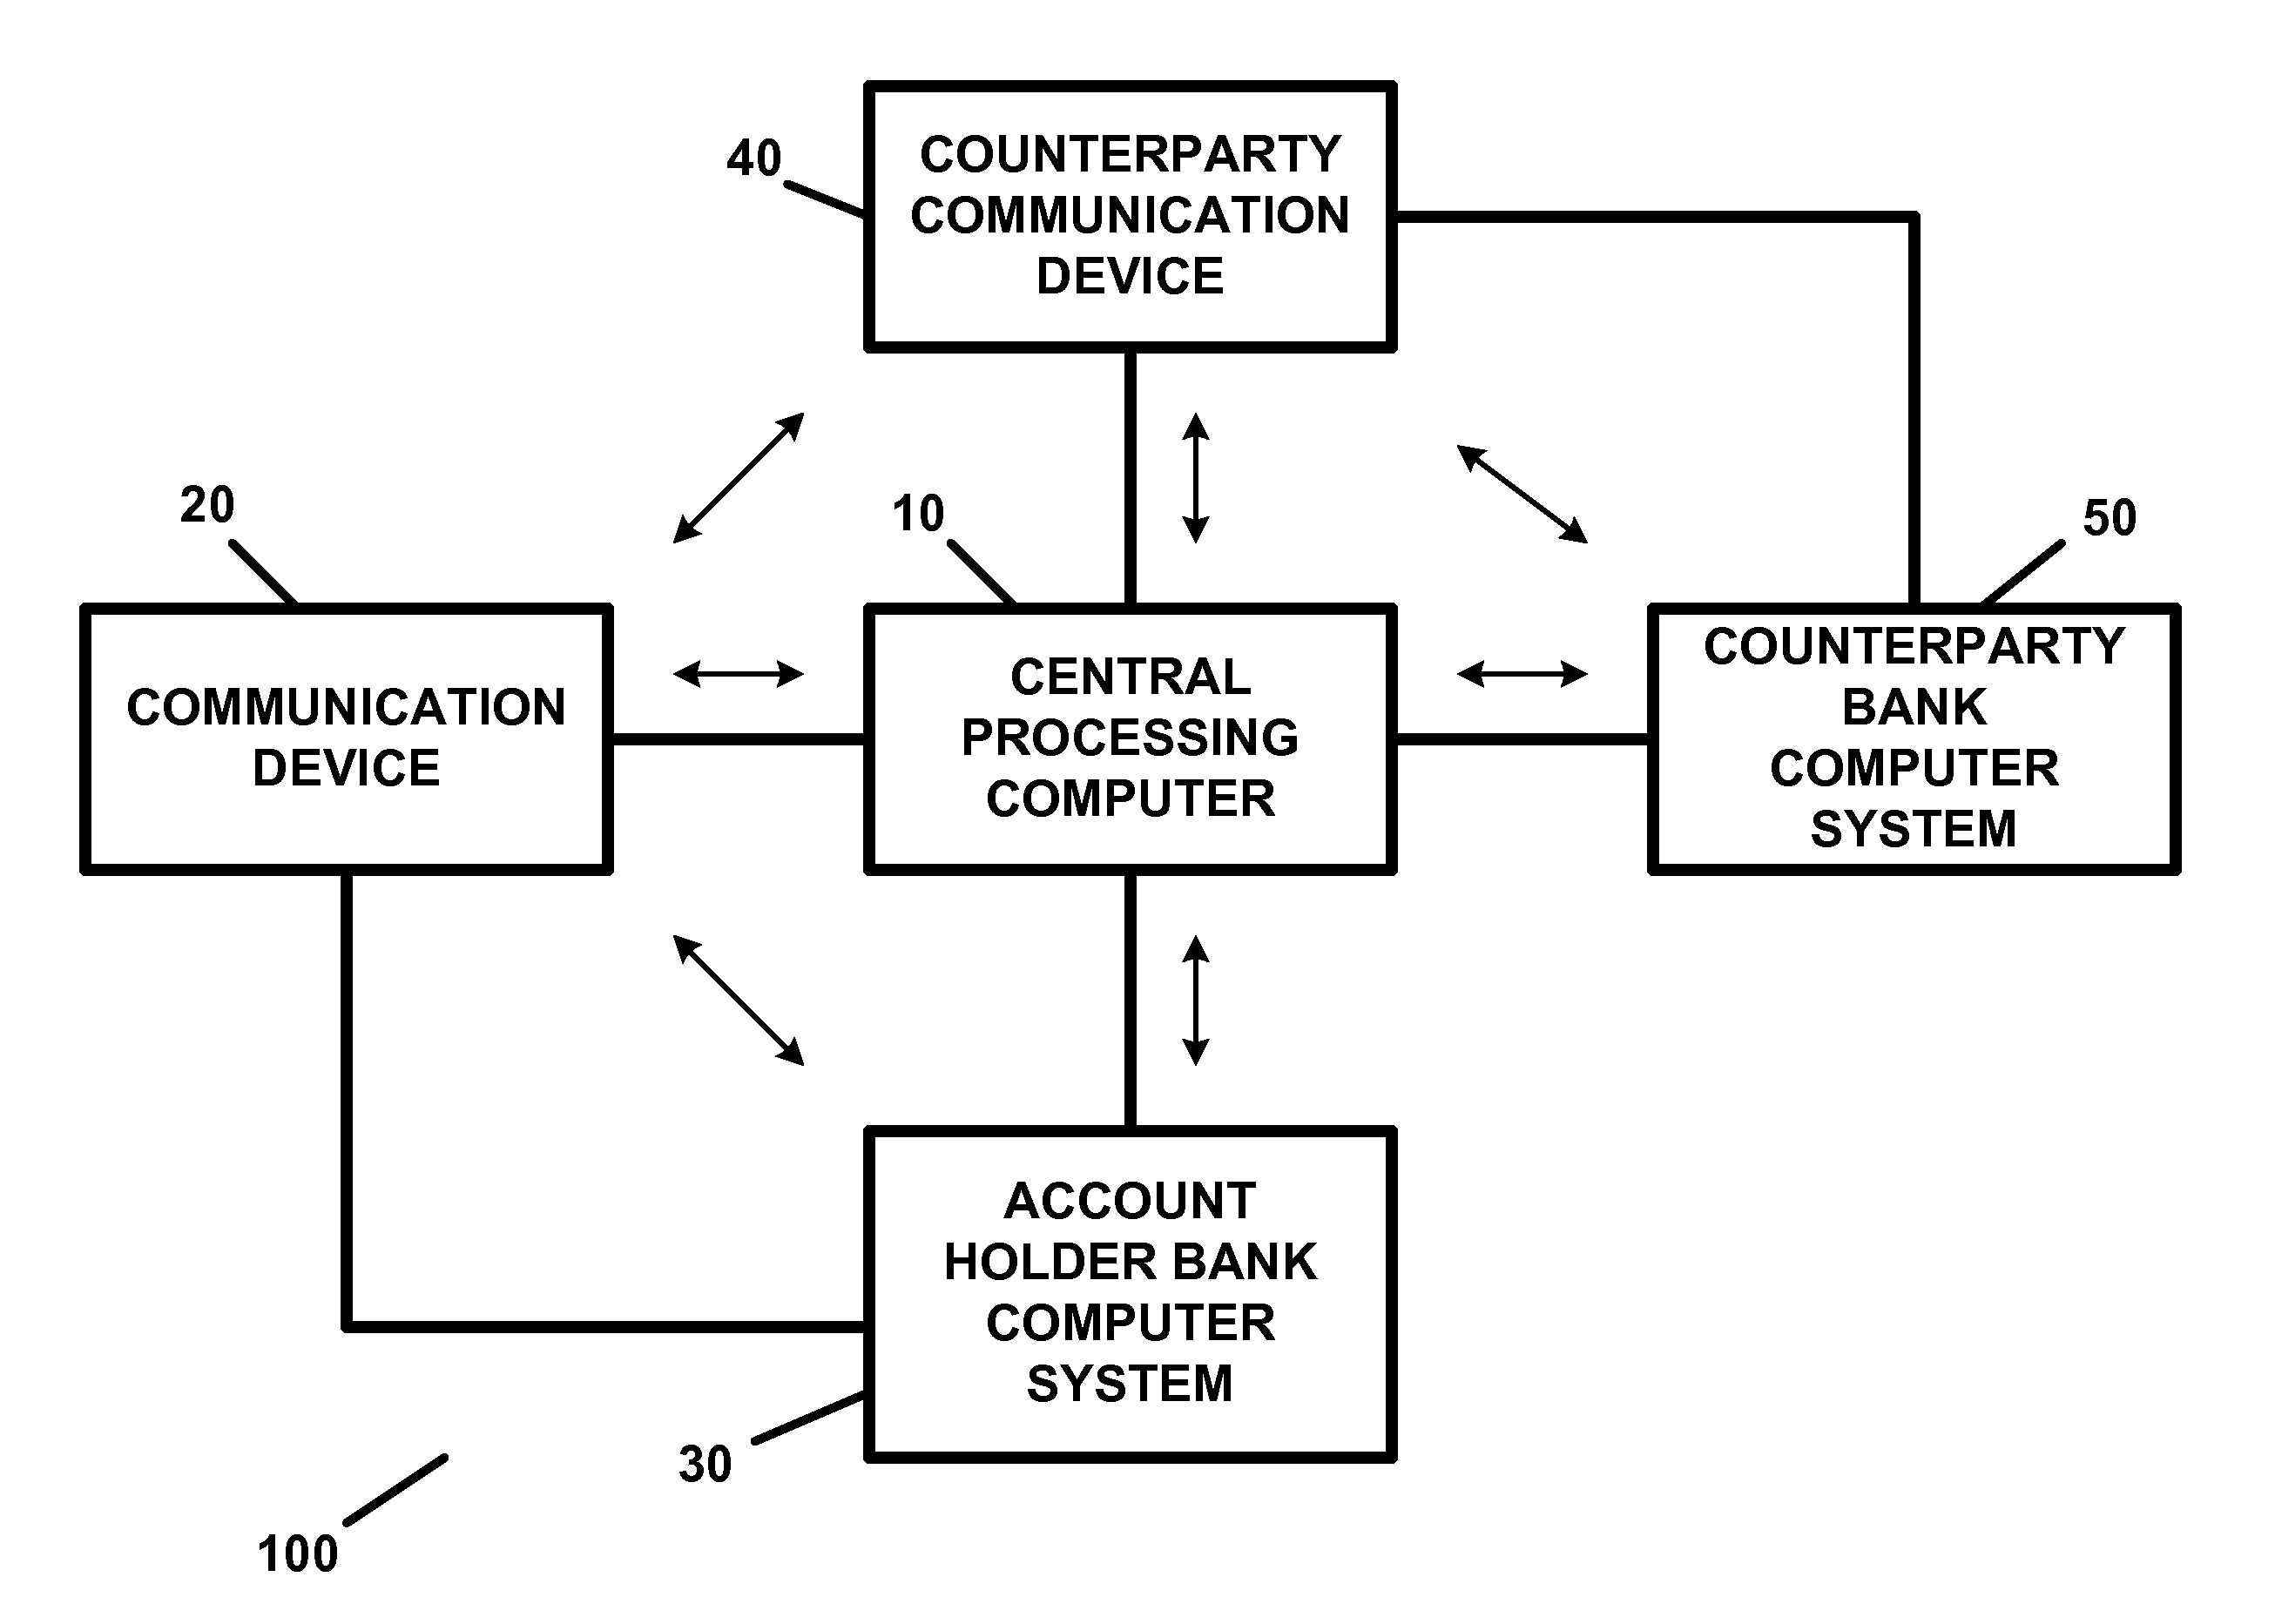 Apparatus and method for providing transaction security and/or account security